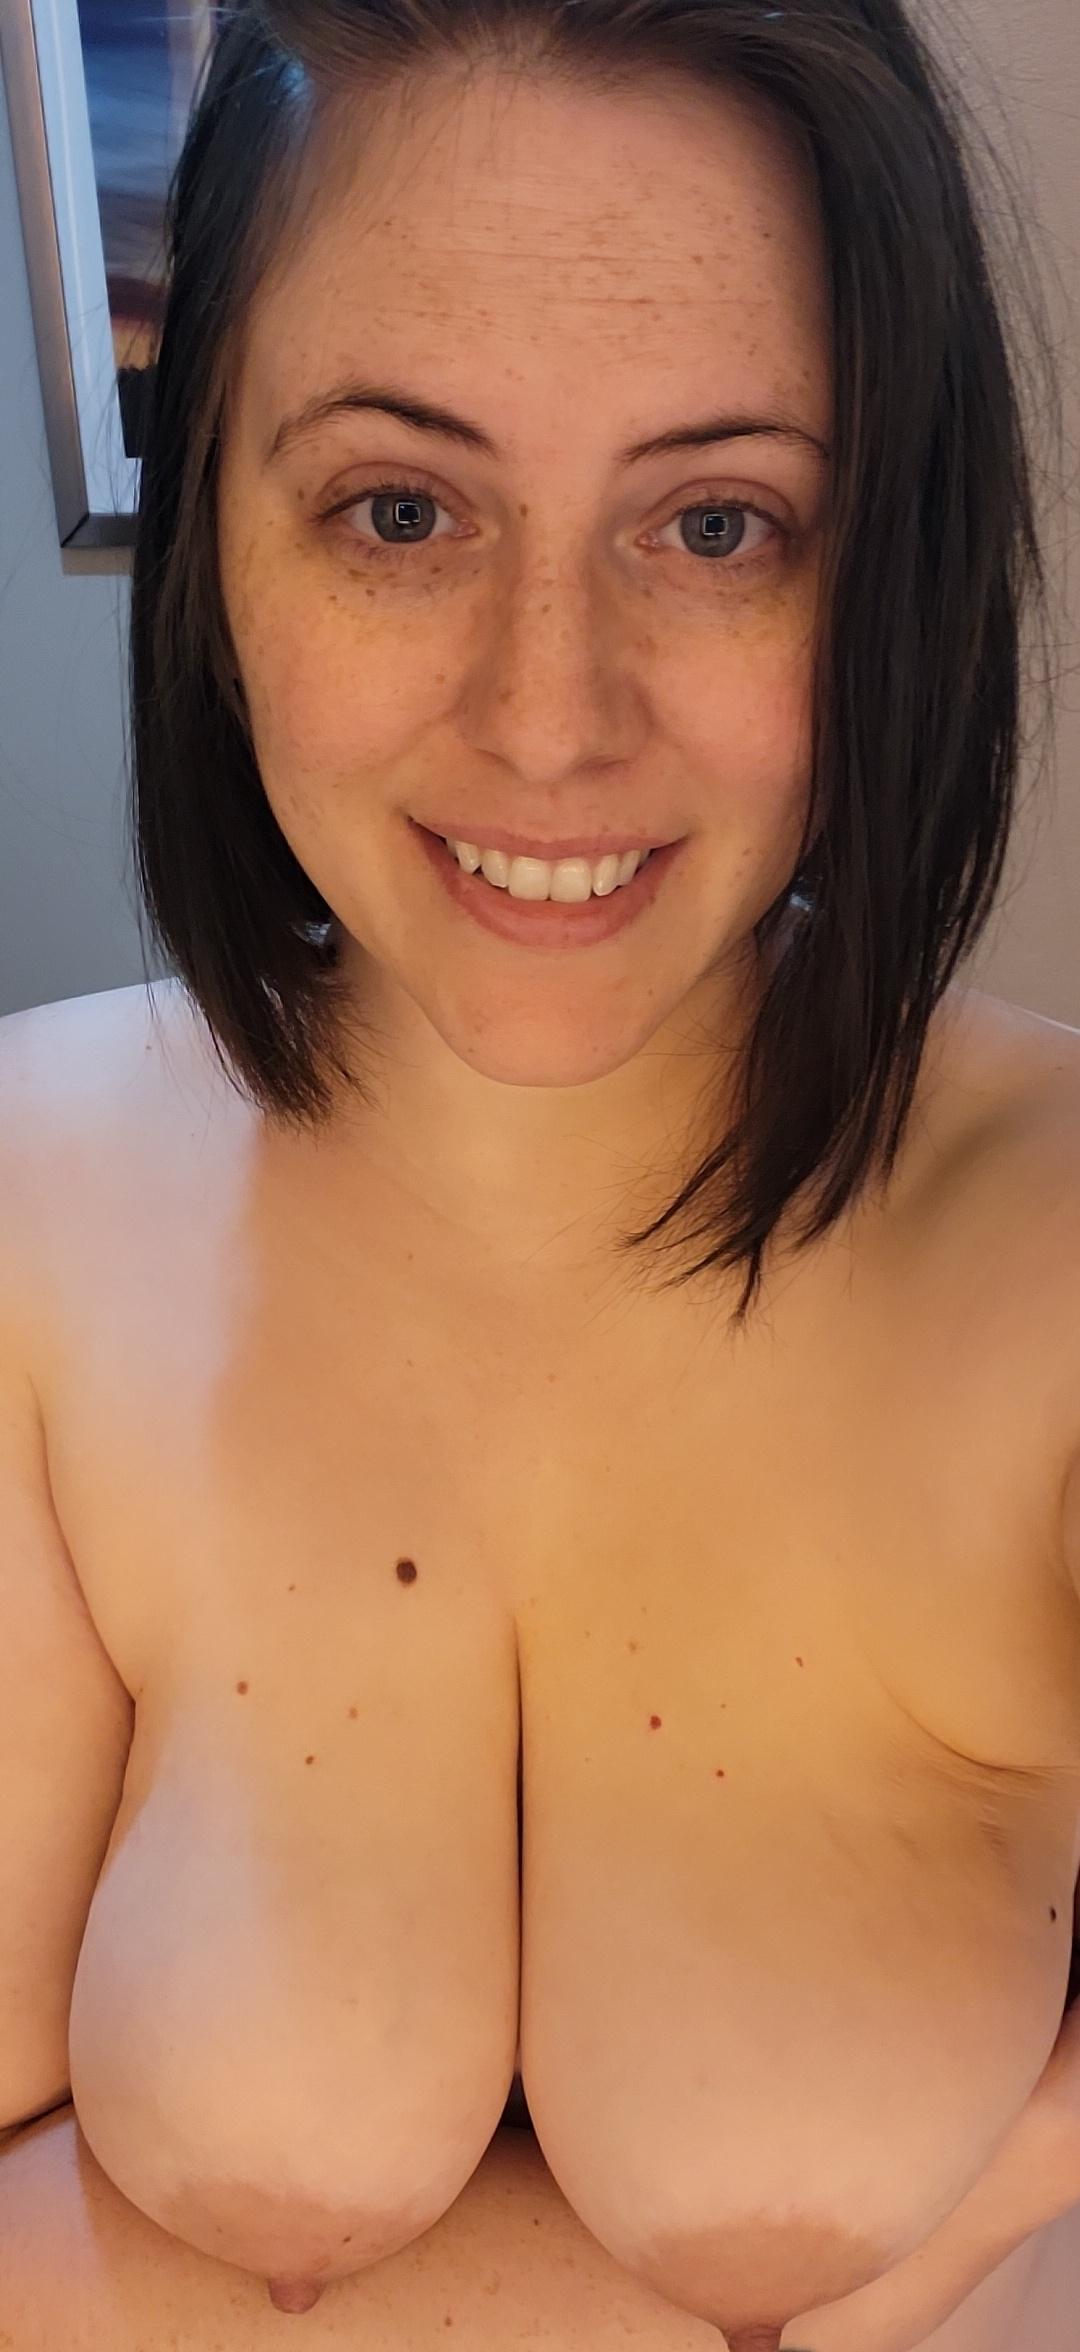 Freckles and tits